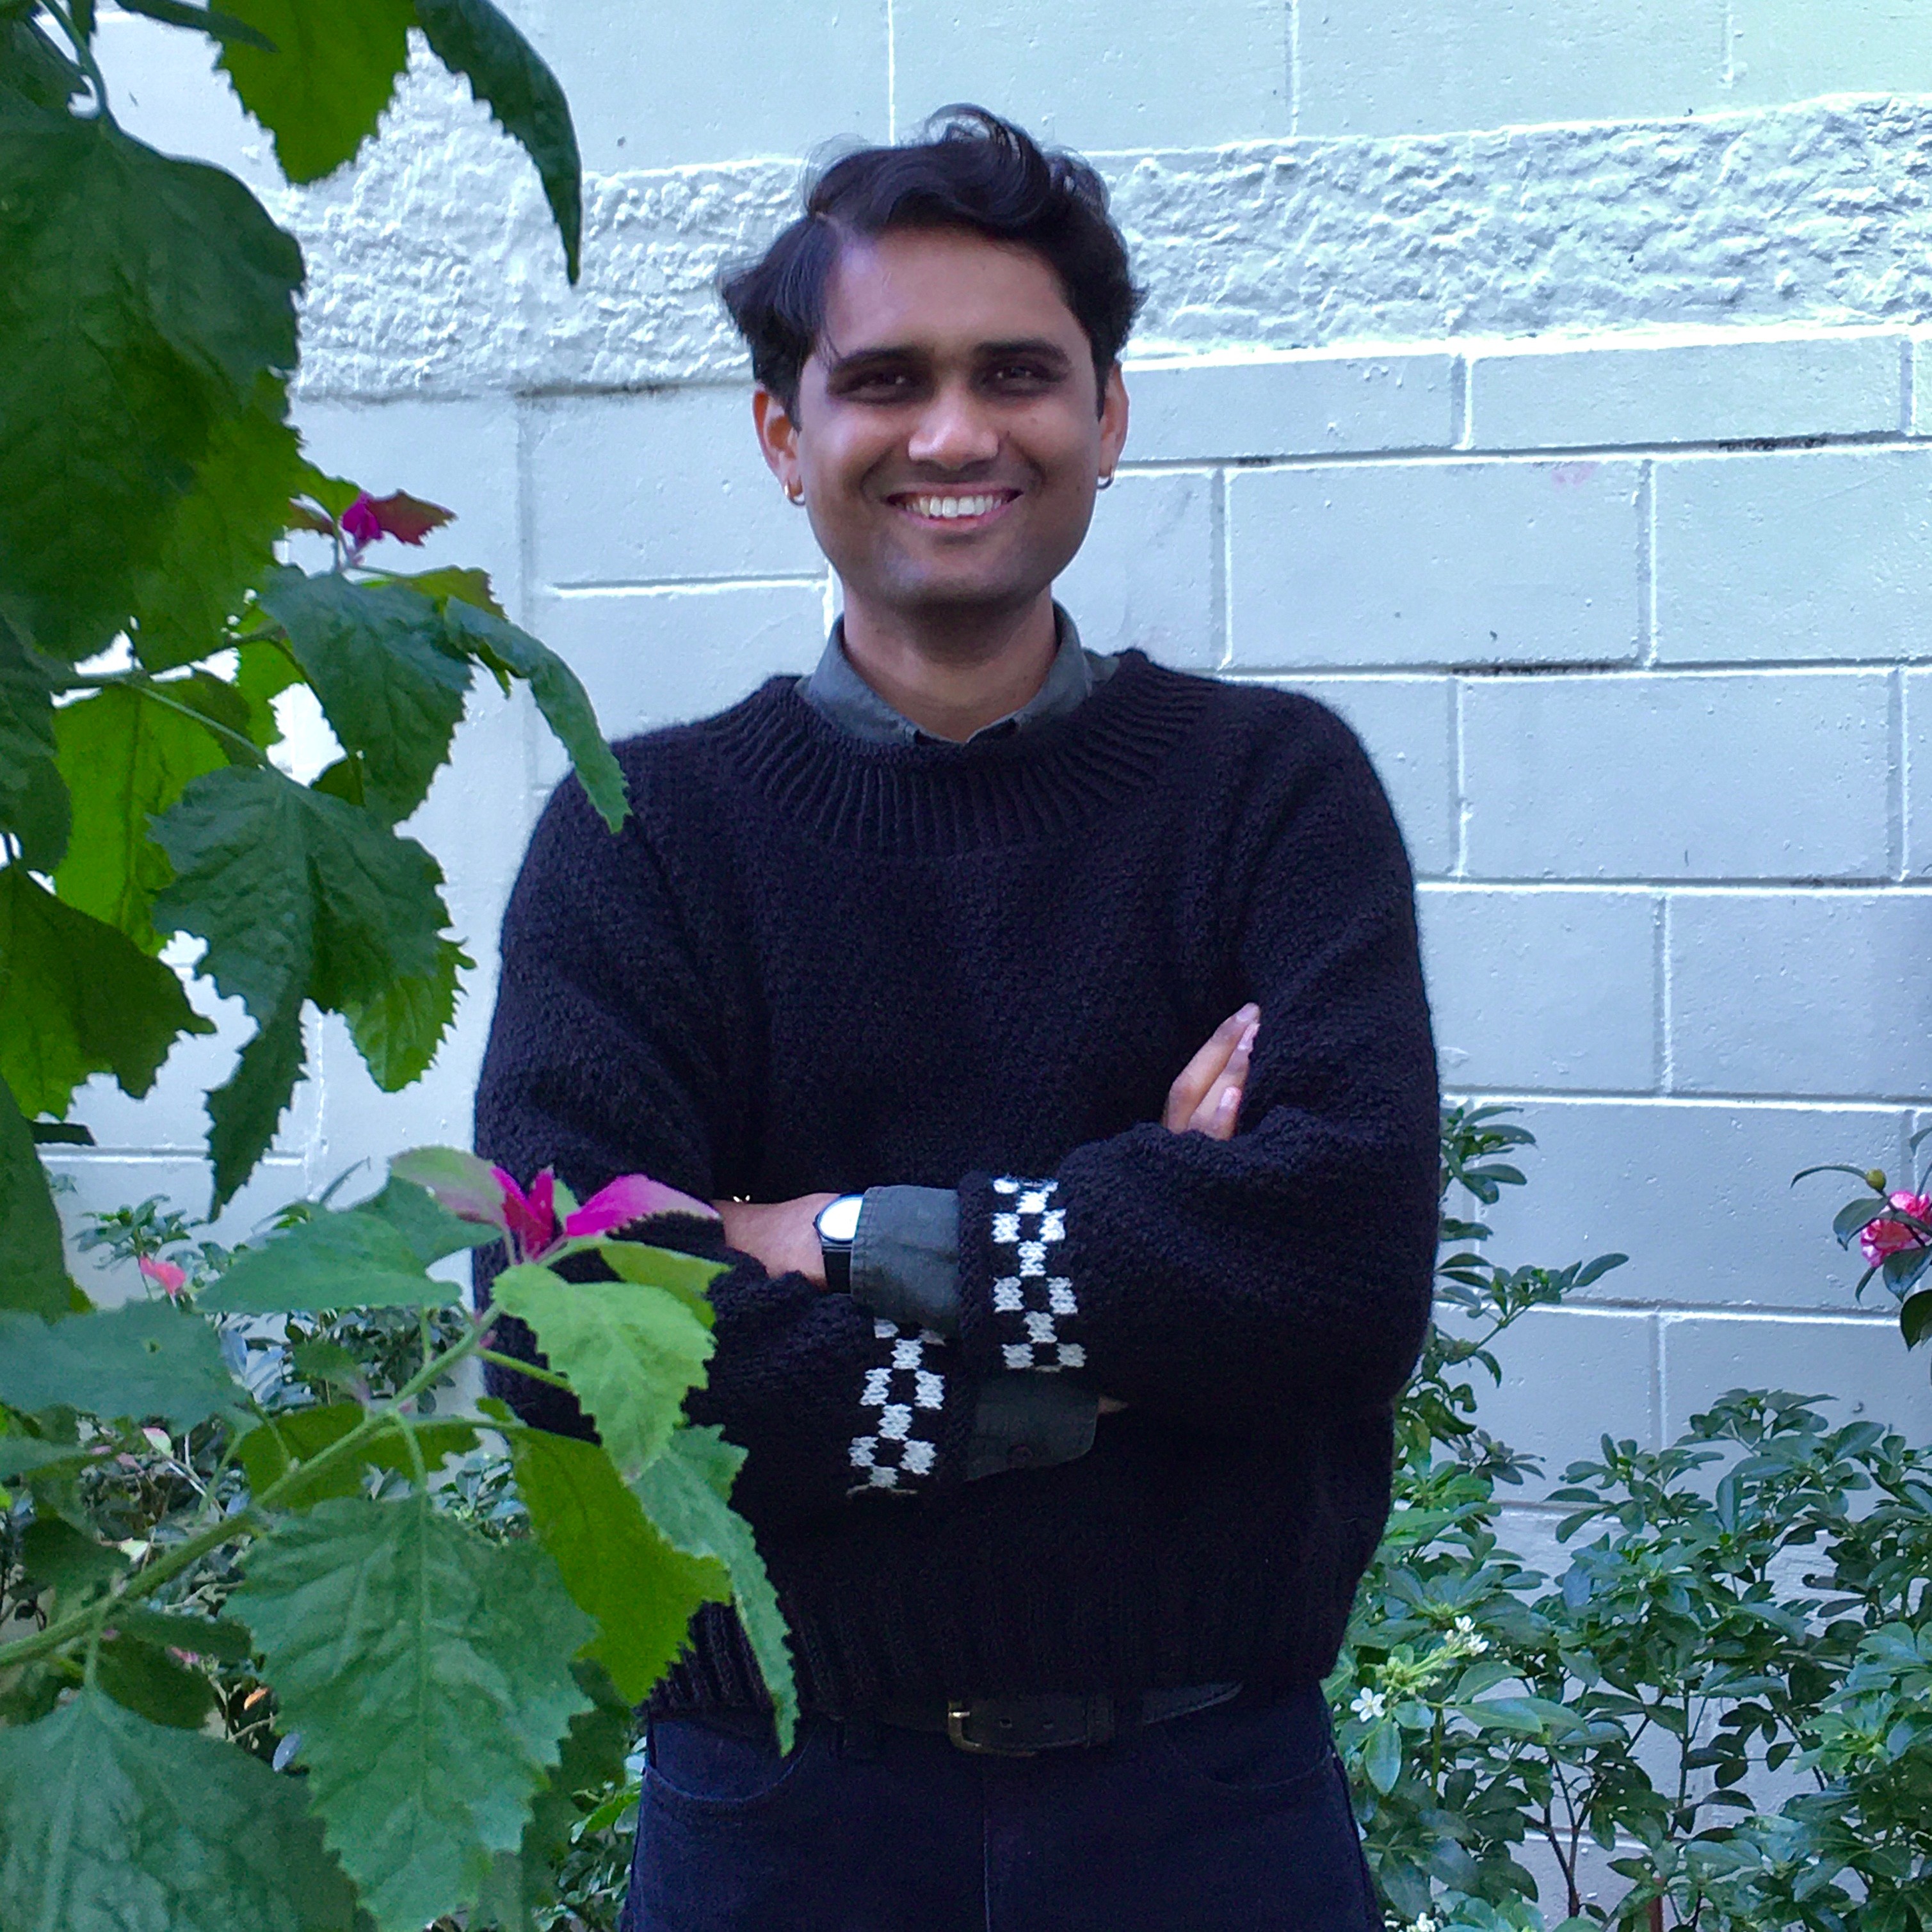 Photo of a man in front of a white brick background amongst flowering greenery. He is smiling, wearing jeans and a black jumper with black and white checkered cuffs.